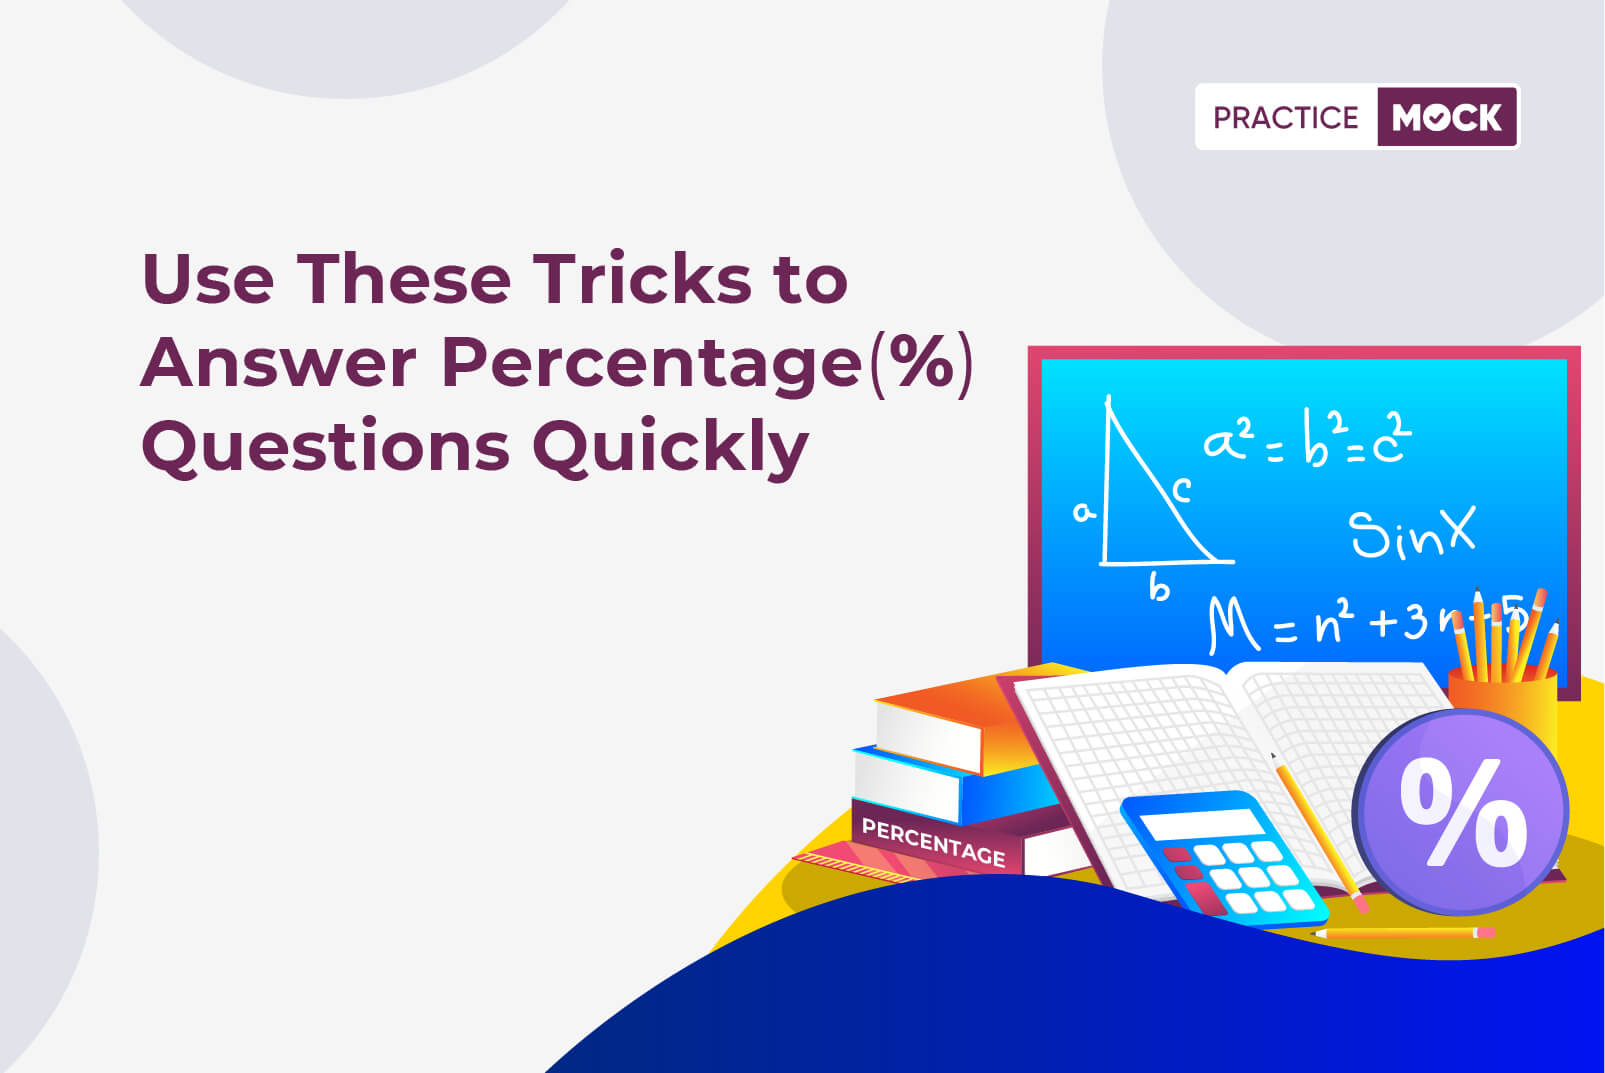 Use these tricks to Answer Percentage Questions Quickly